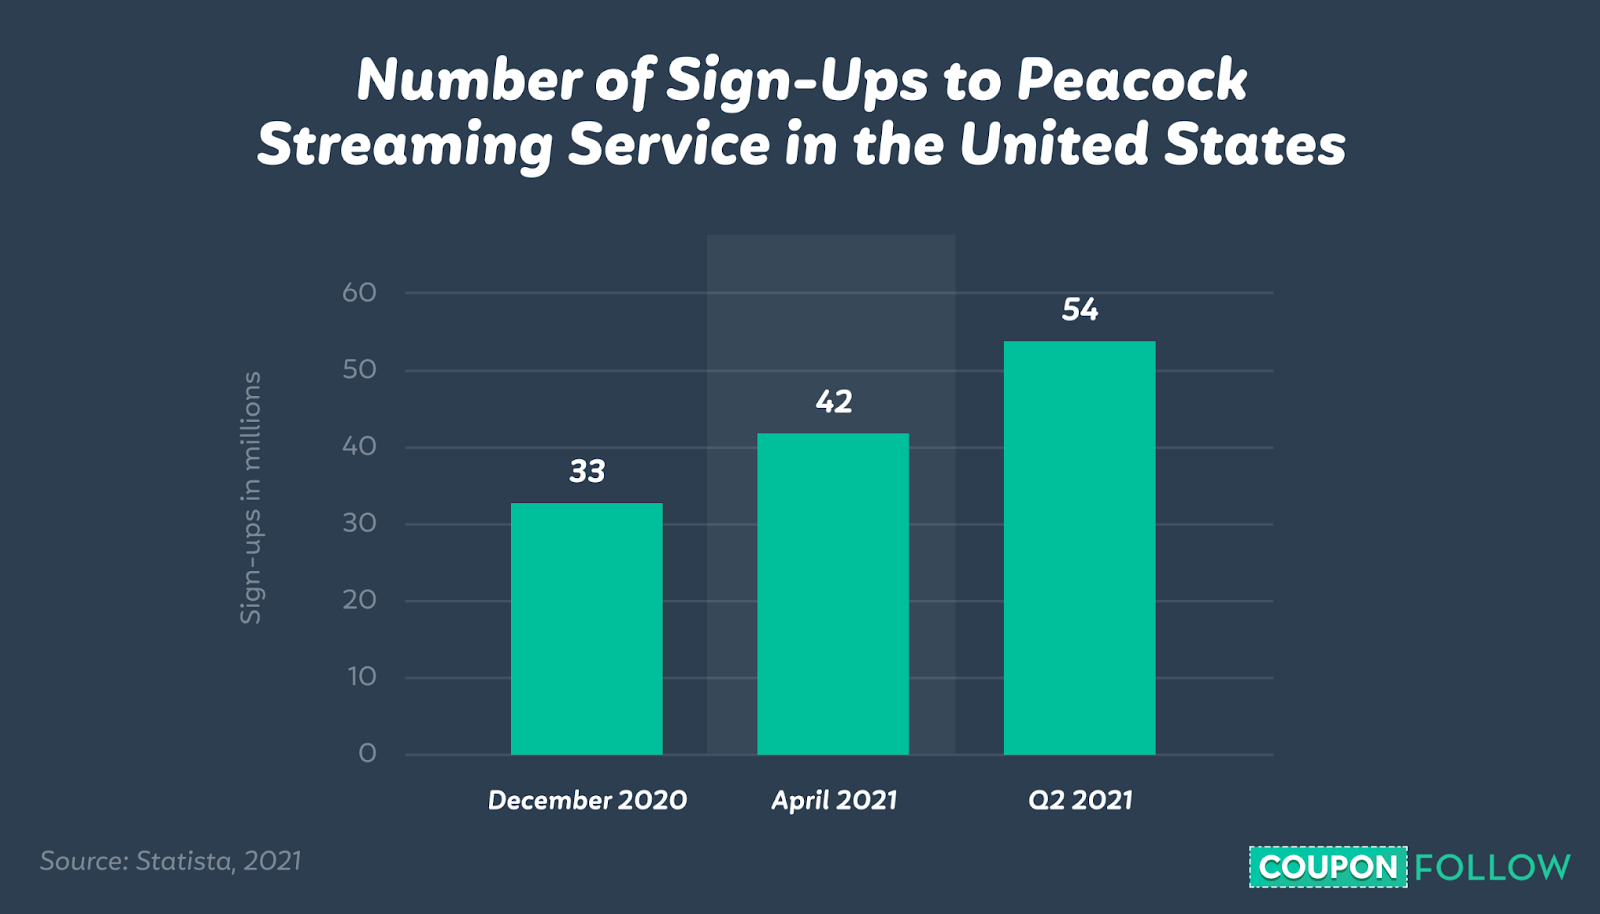 graph depicting the growth of peacock sign-ups